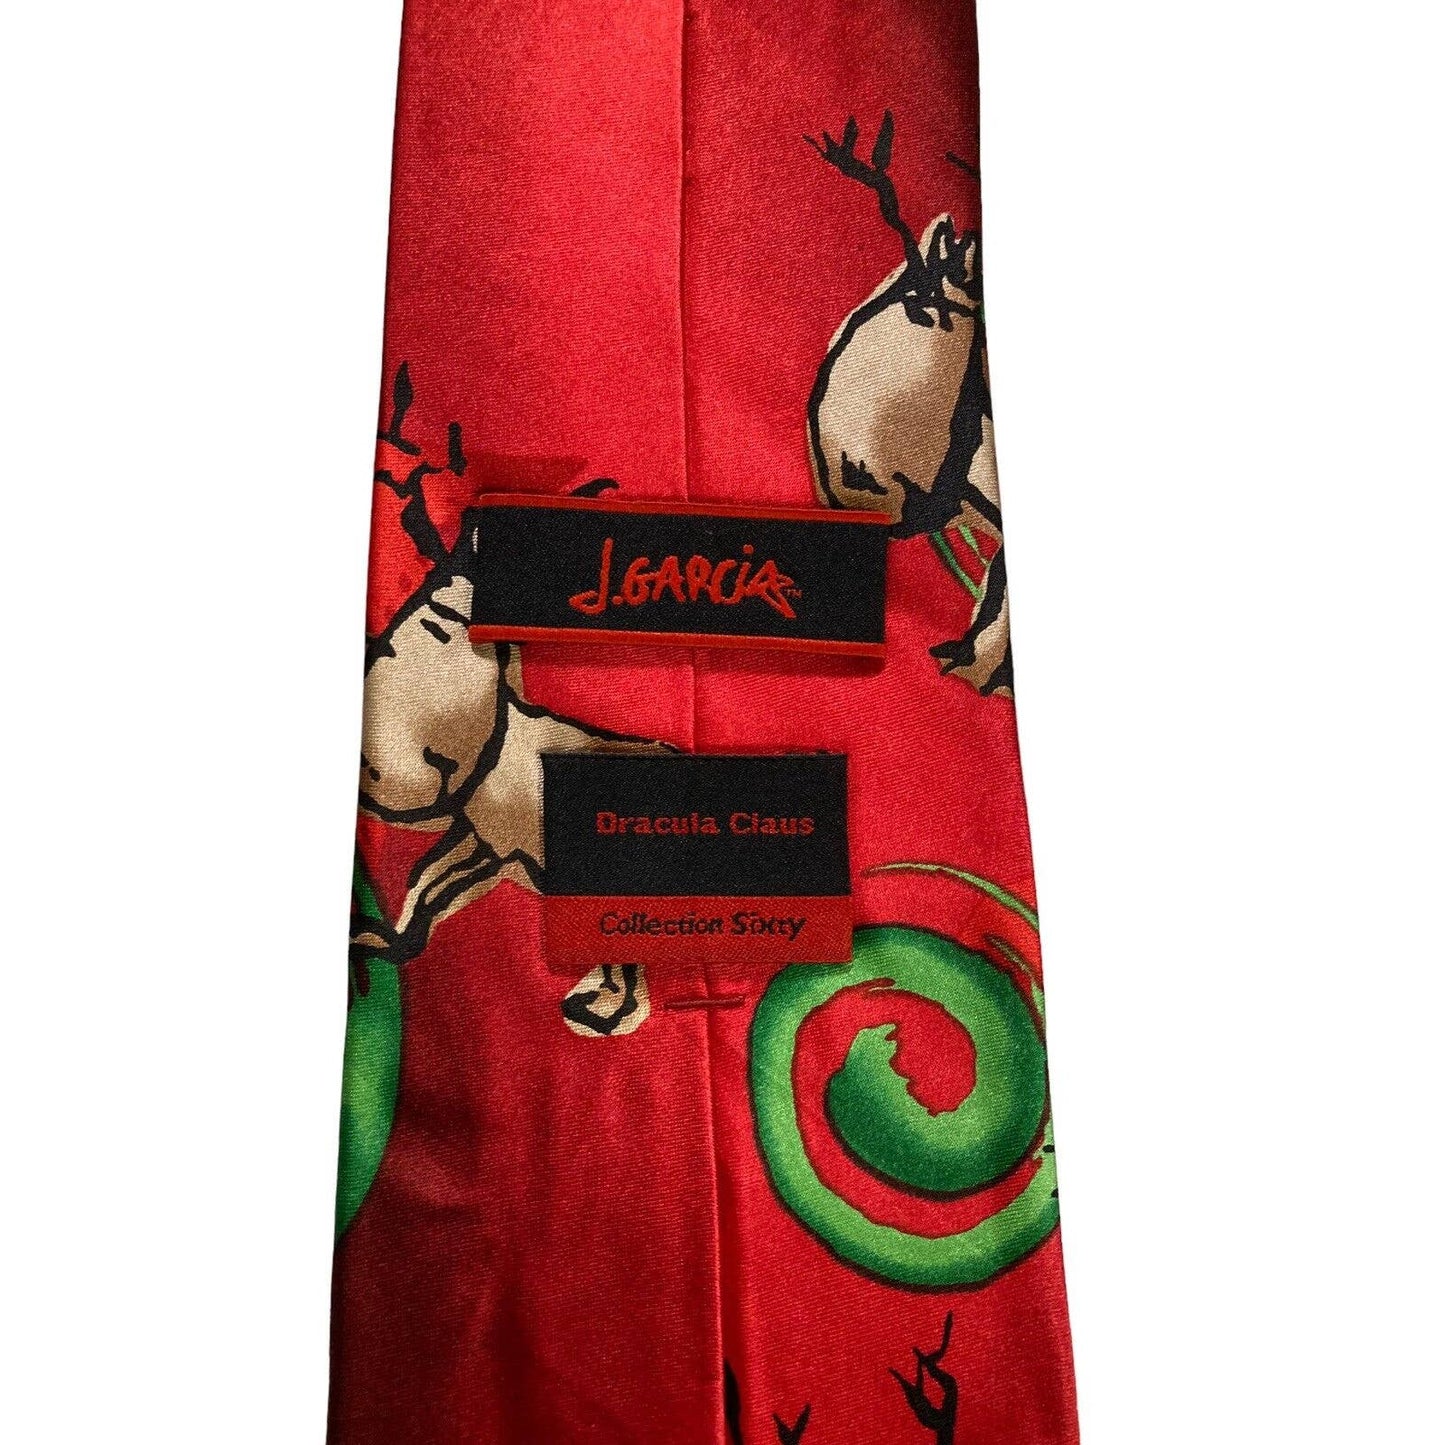 J Garcia Dracula Claus Collection Sixty Christmas Reindeer Novelty Necktie